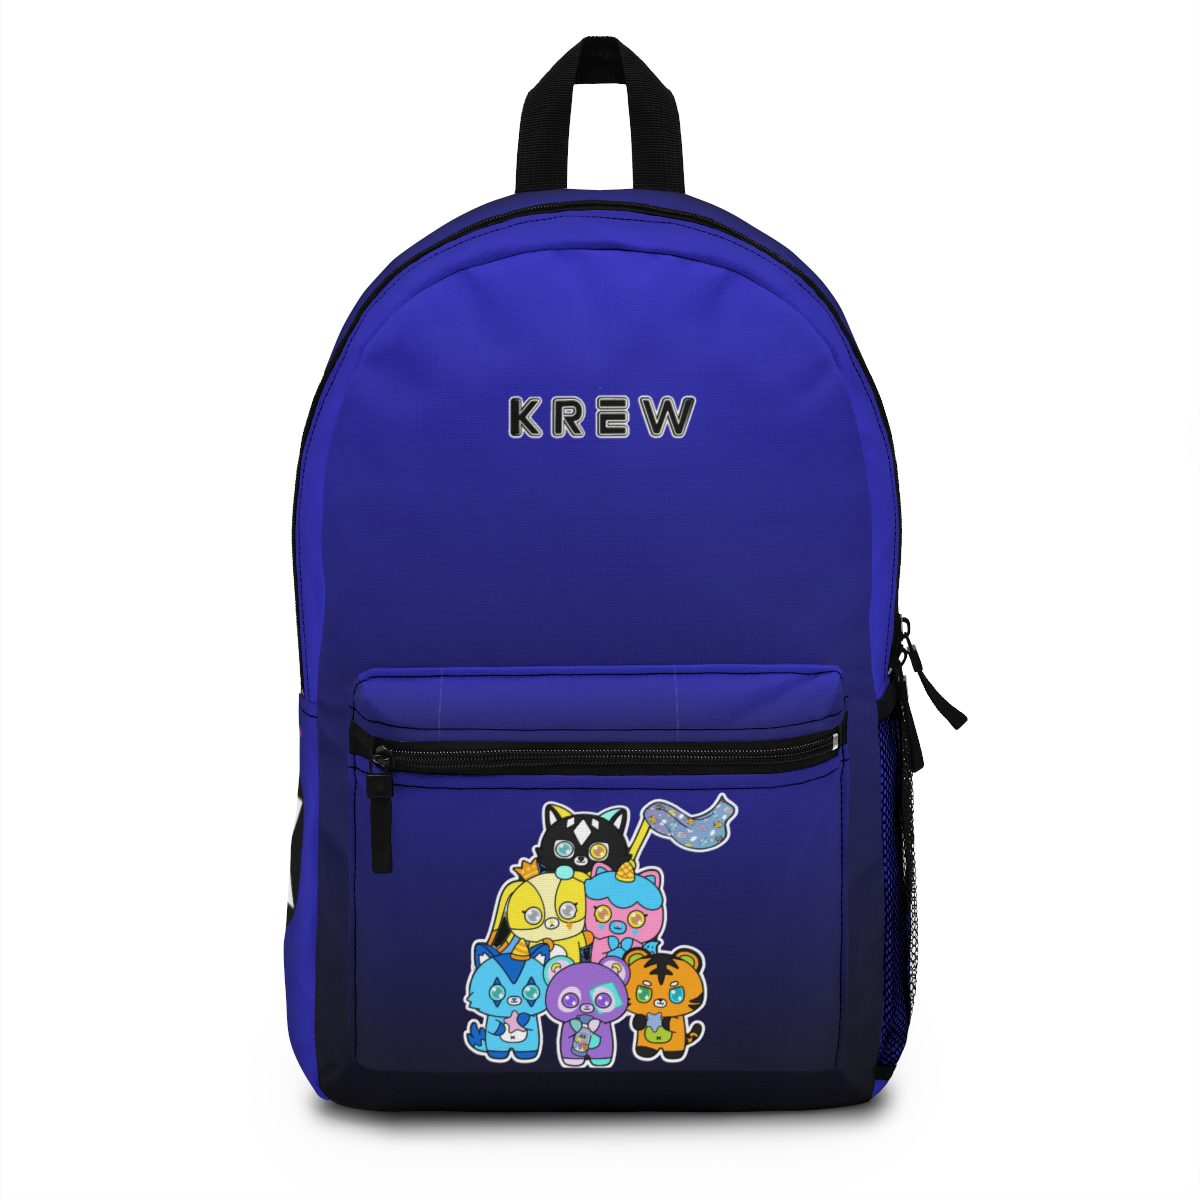 Medium Blue Backpack Krew District TV Show with KREWBIES on Pocket Cool Kiddo